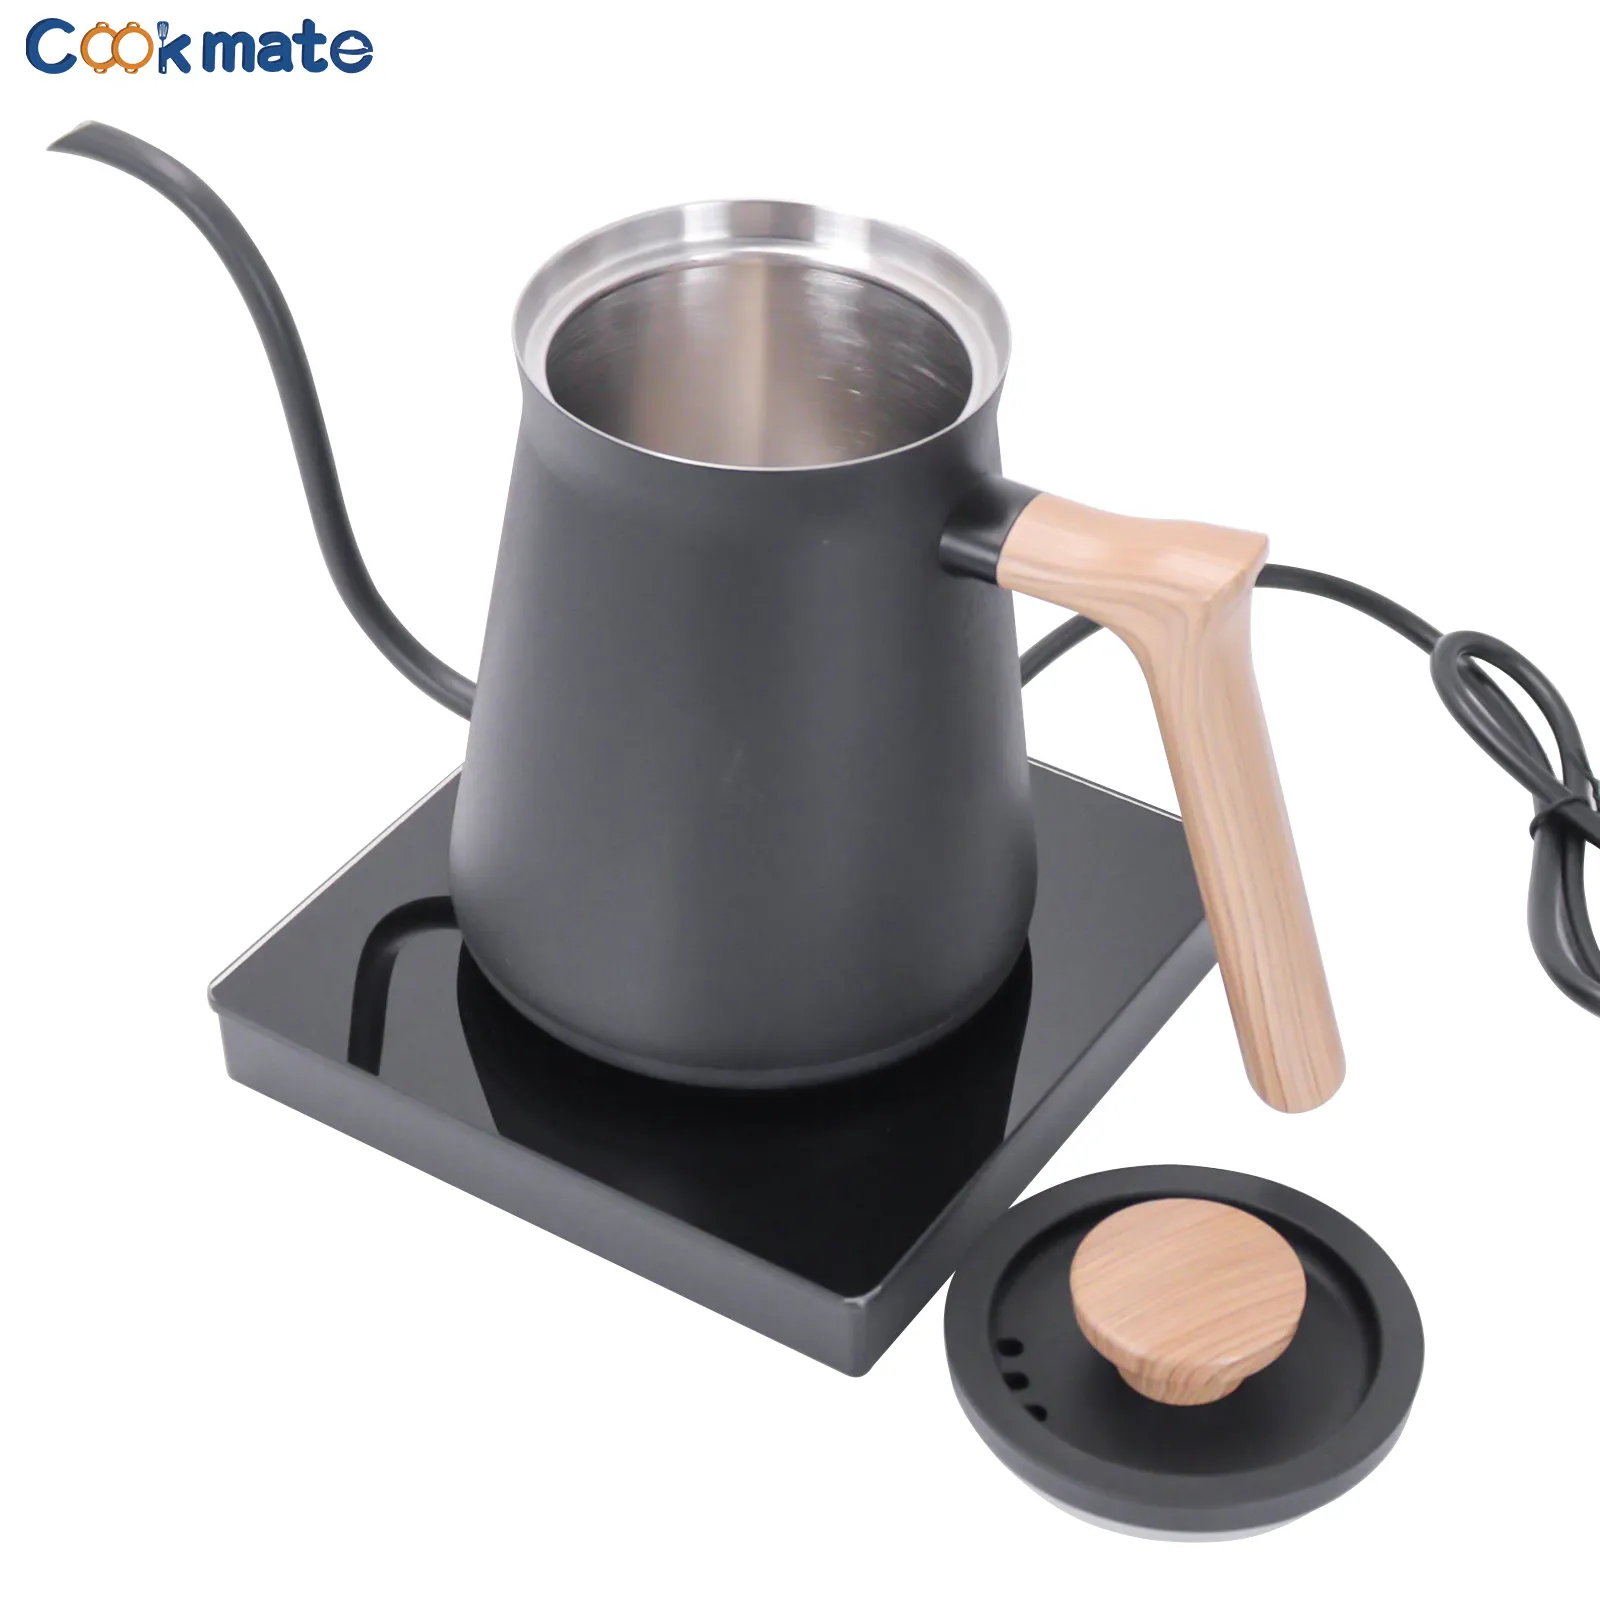 230V 110V Stainless Steel Electric Coffee Tea Kettle Digital Panel Temperature Control Pot Jug